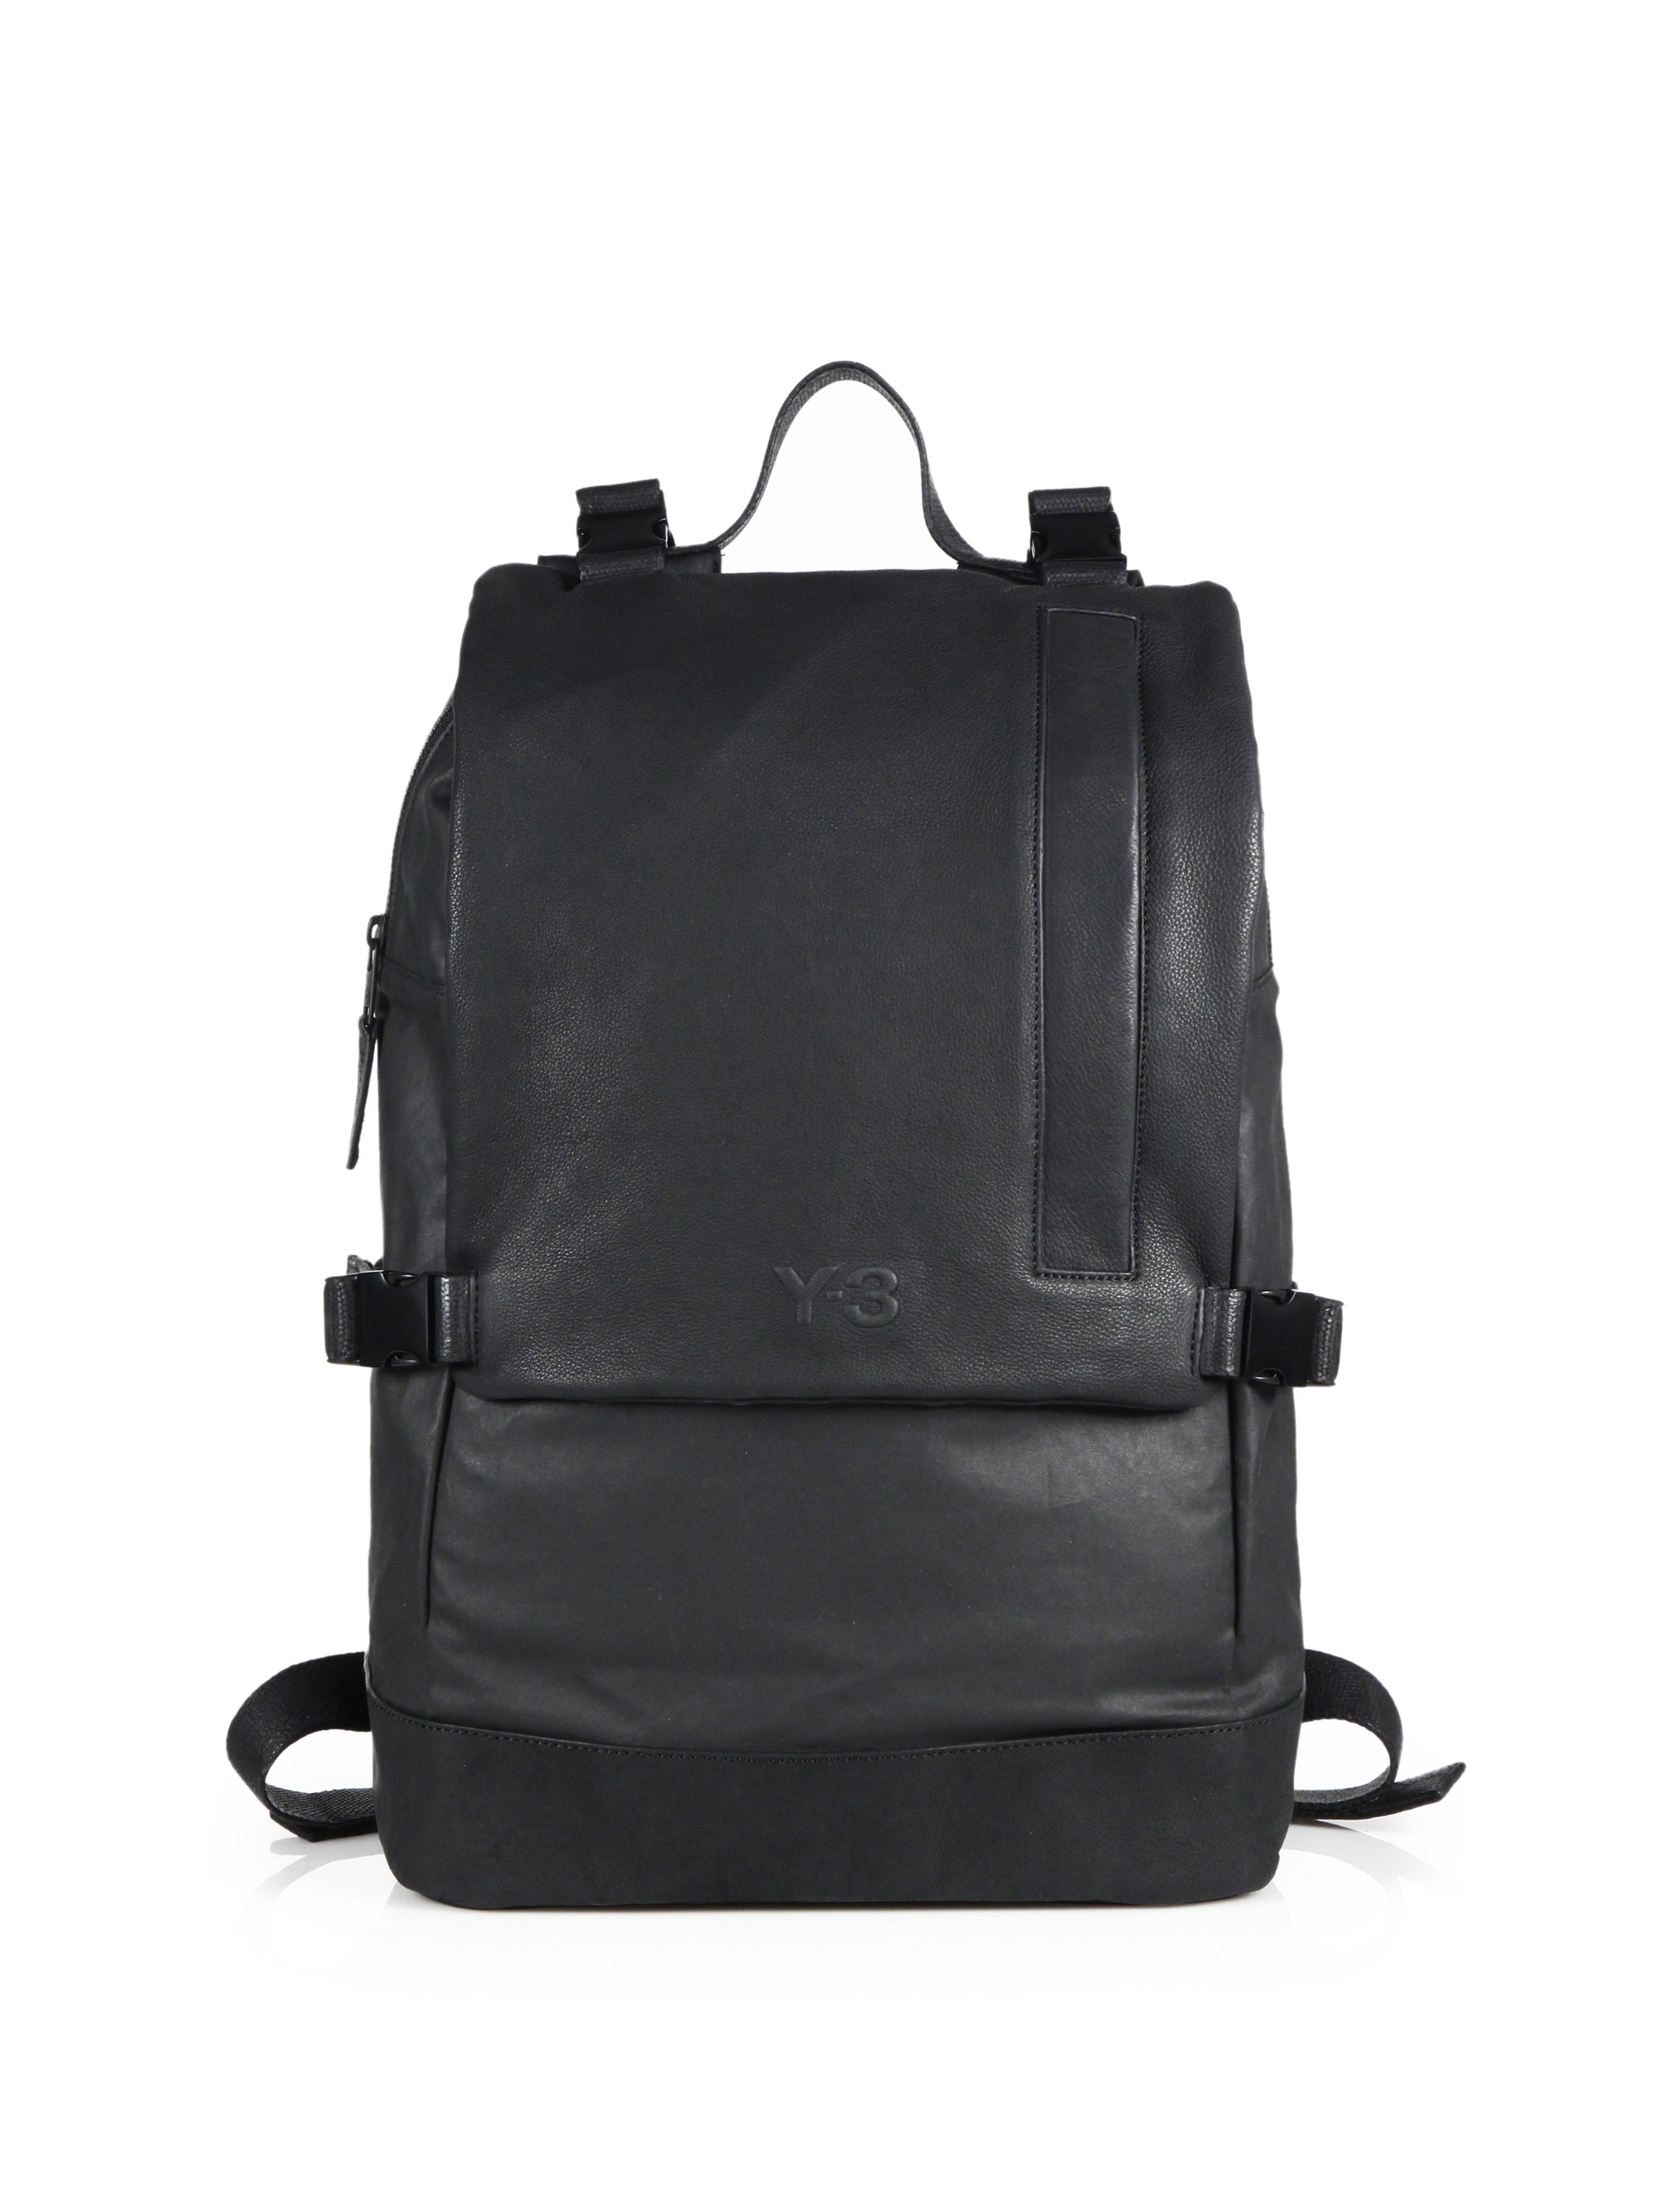 Lyst - Y-3 Coated Canvas & Leather Backpack in Black for Men